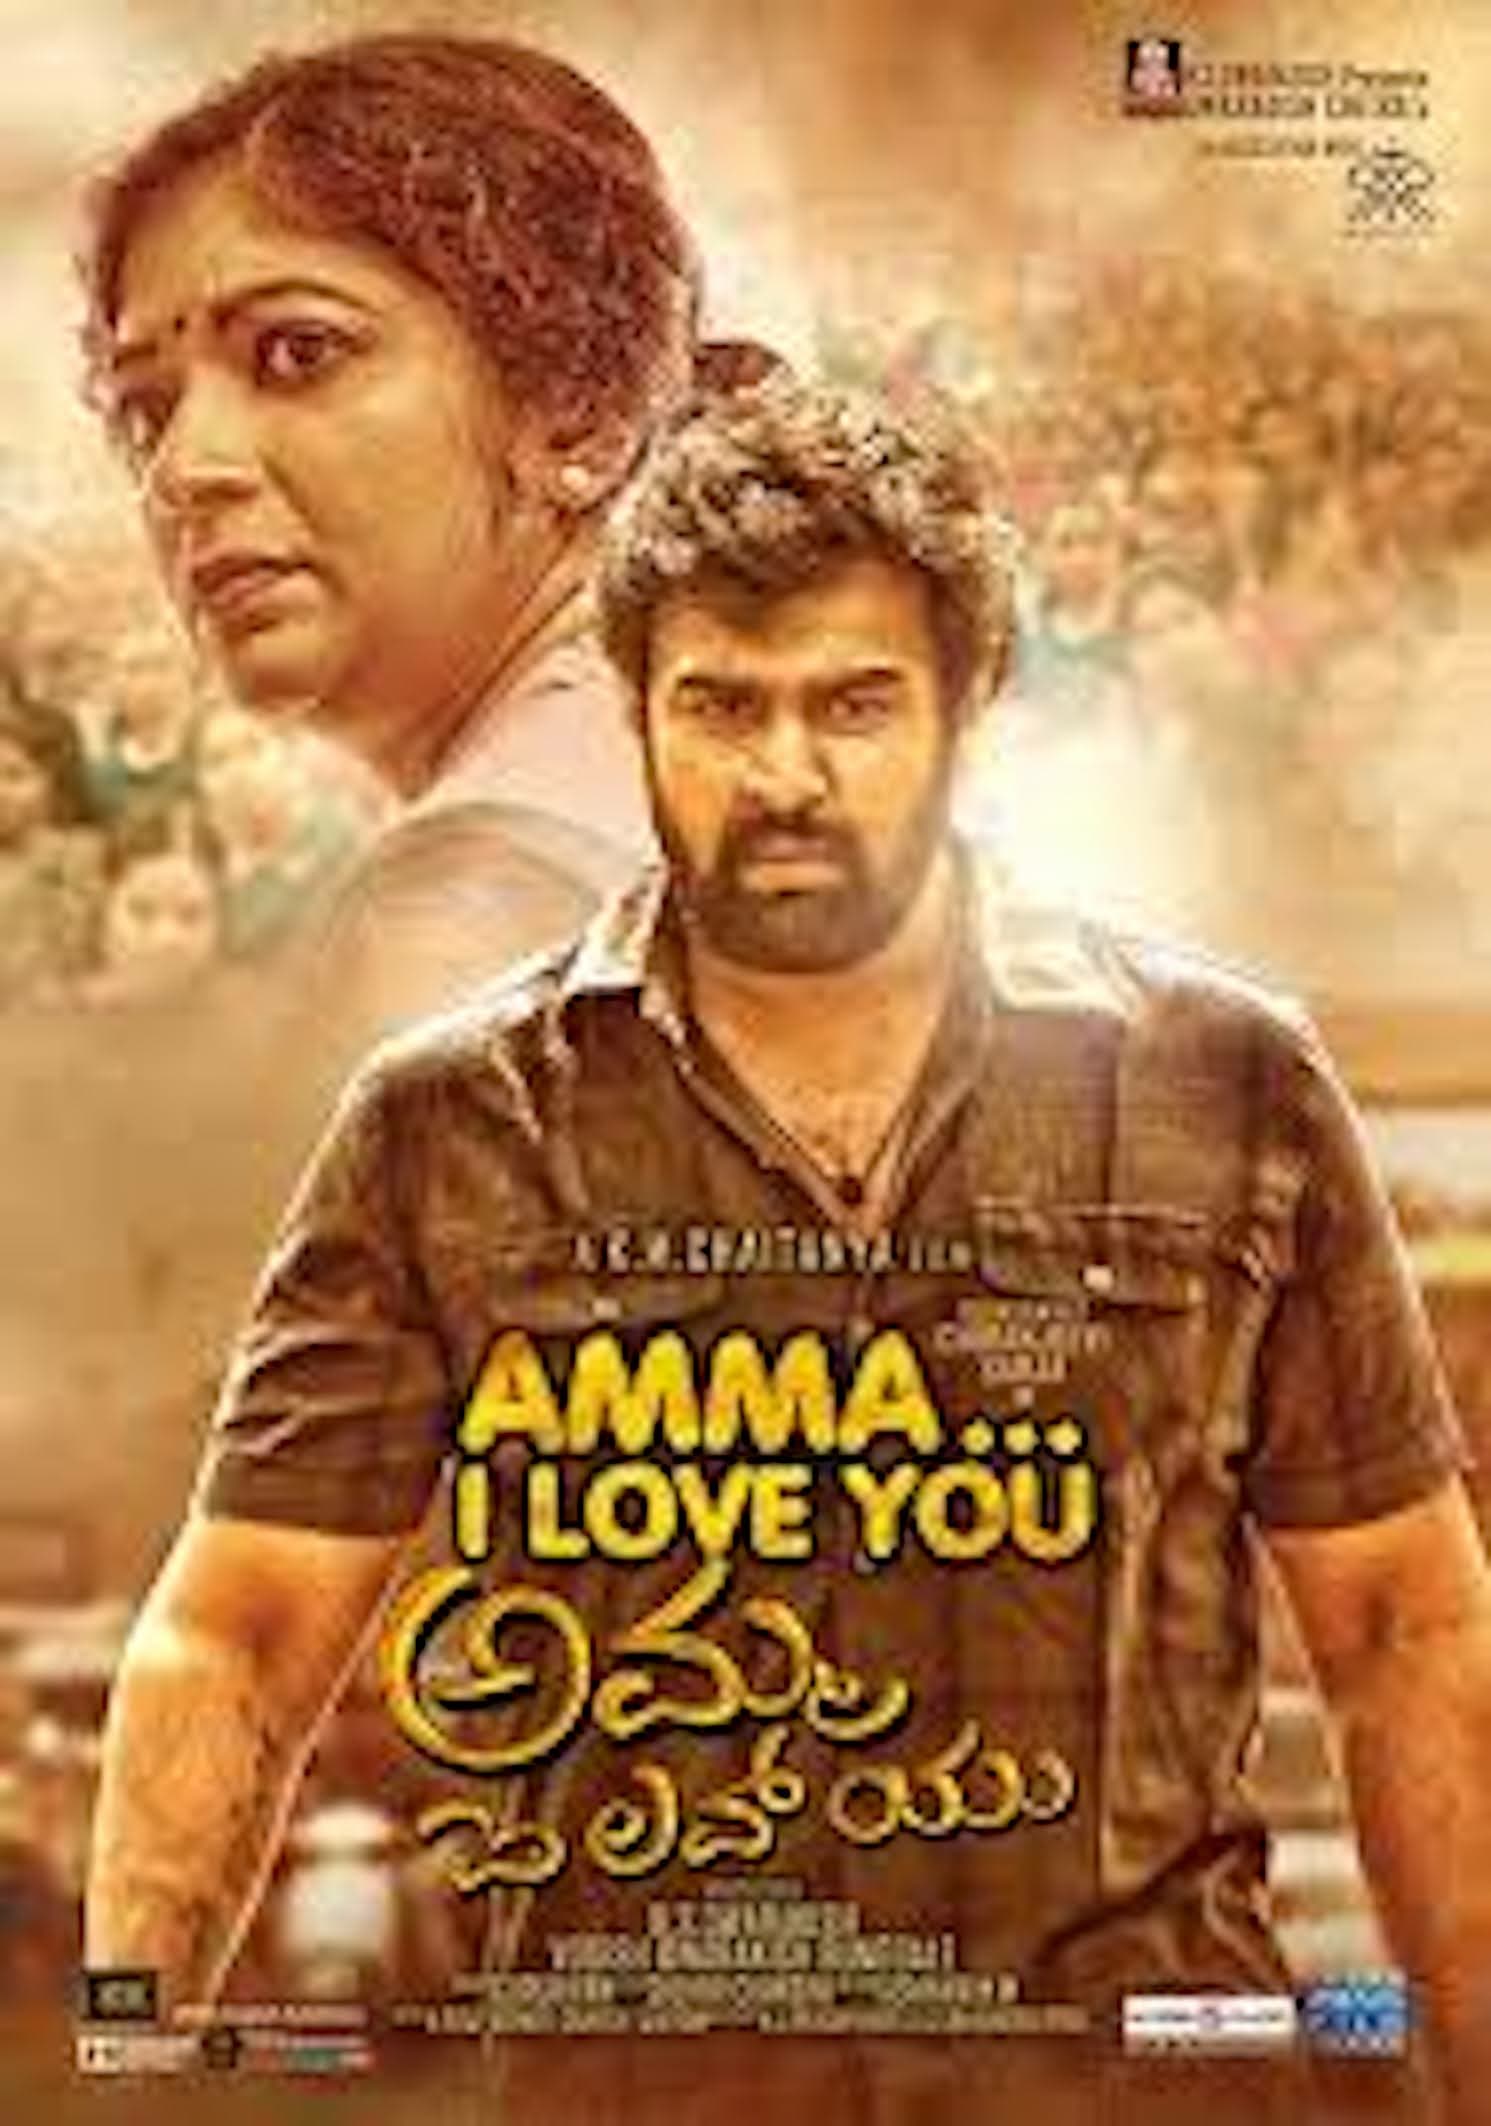 Poster for the movie "Amma I Love You"